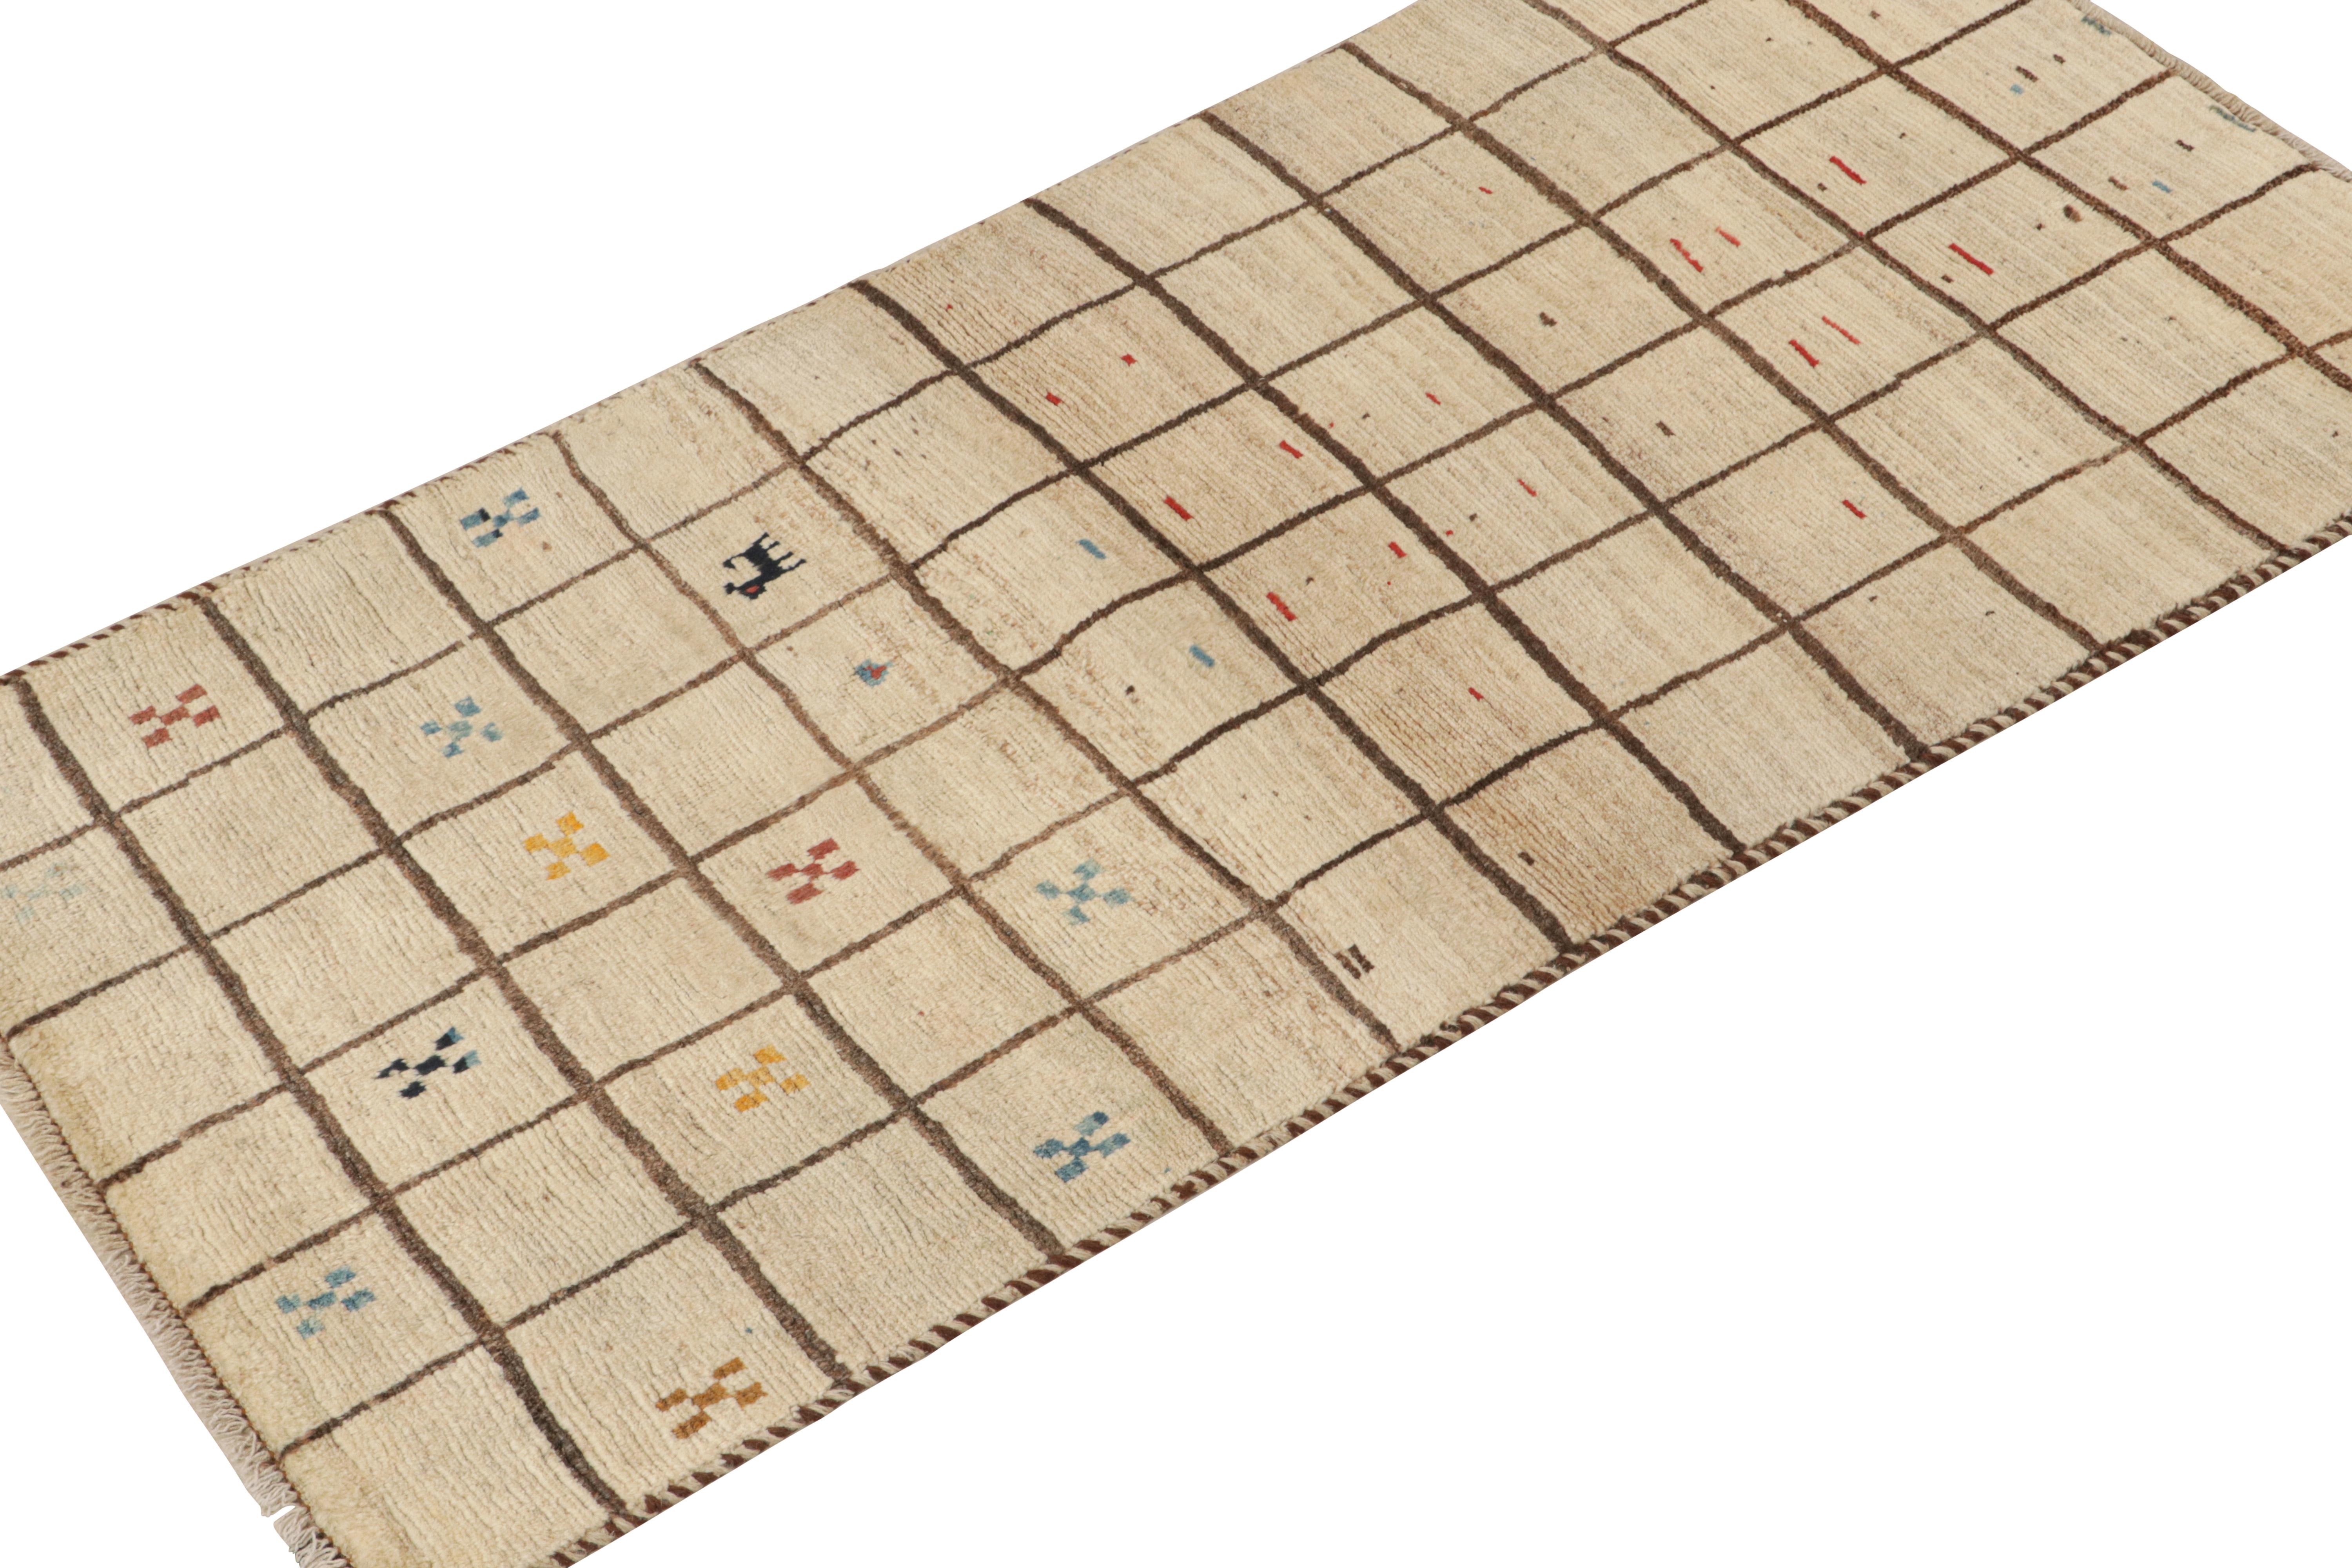 This vintage 2x6 Persian runner is a Gabbeh rug that originates from the Qashqai tribe—hand-knotted in wool circa 1950-1960.

Its geometric pattern enjoys a play of beige and brown in a grid with playful accents therein. Connoisseurs will further